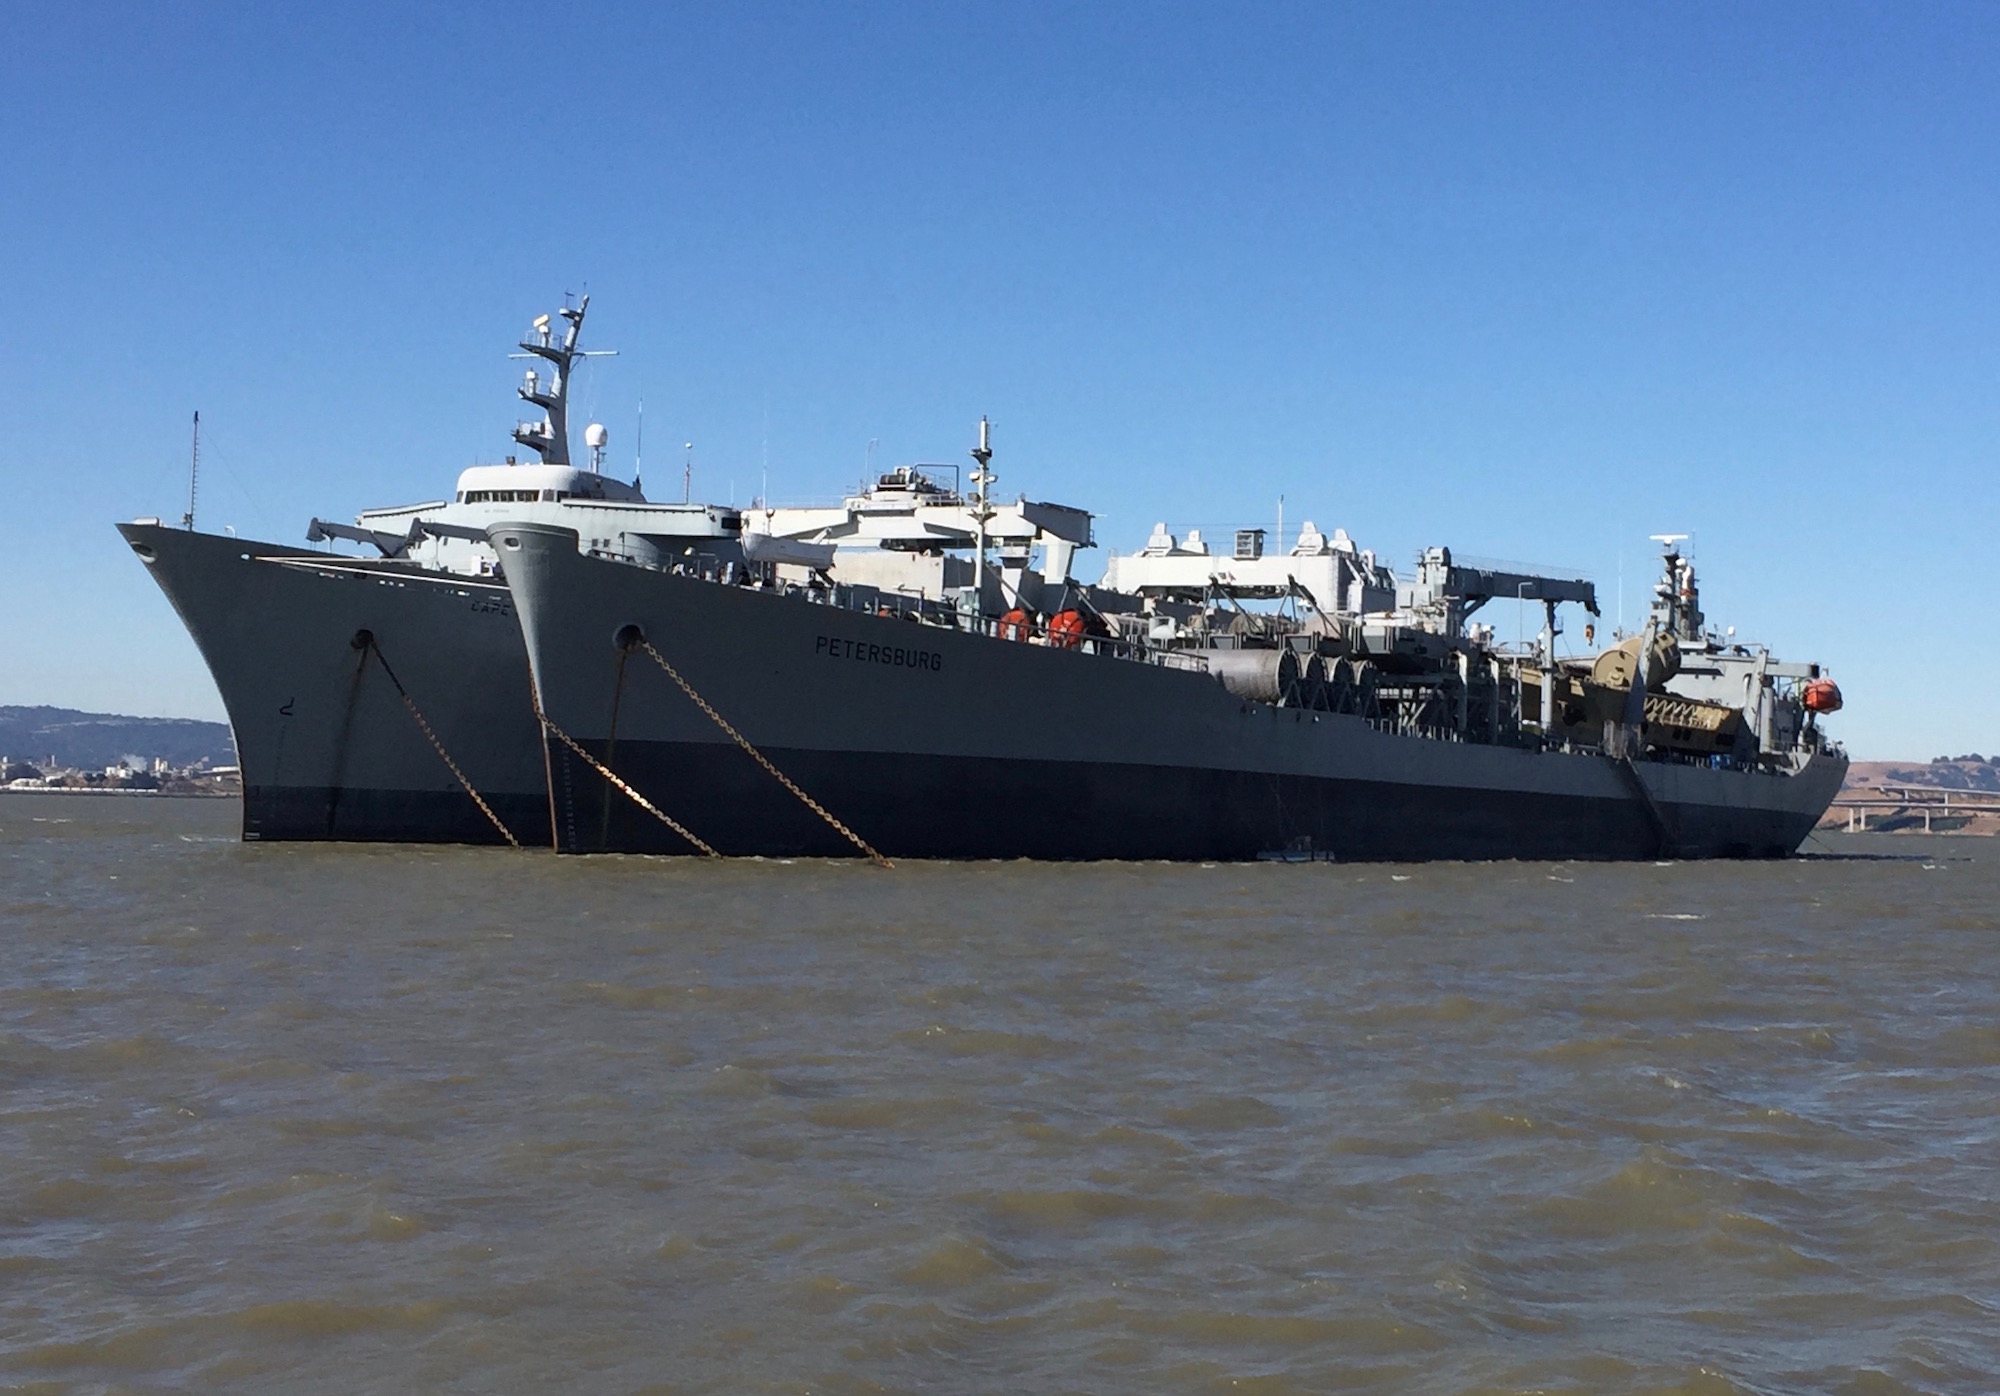 The Petersburg (foreground) is the newest addition to the Suisun Bay Reserve Fleet. The Navy tanker is part of the "Ready Reserve," meaning it can deploy quickly if needed.